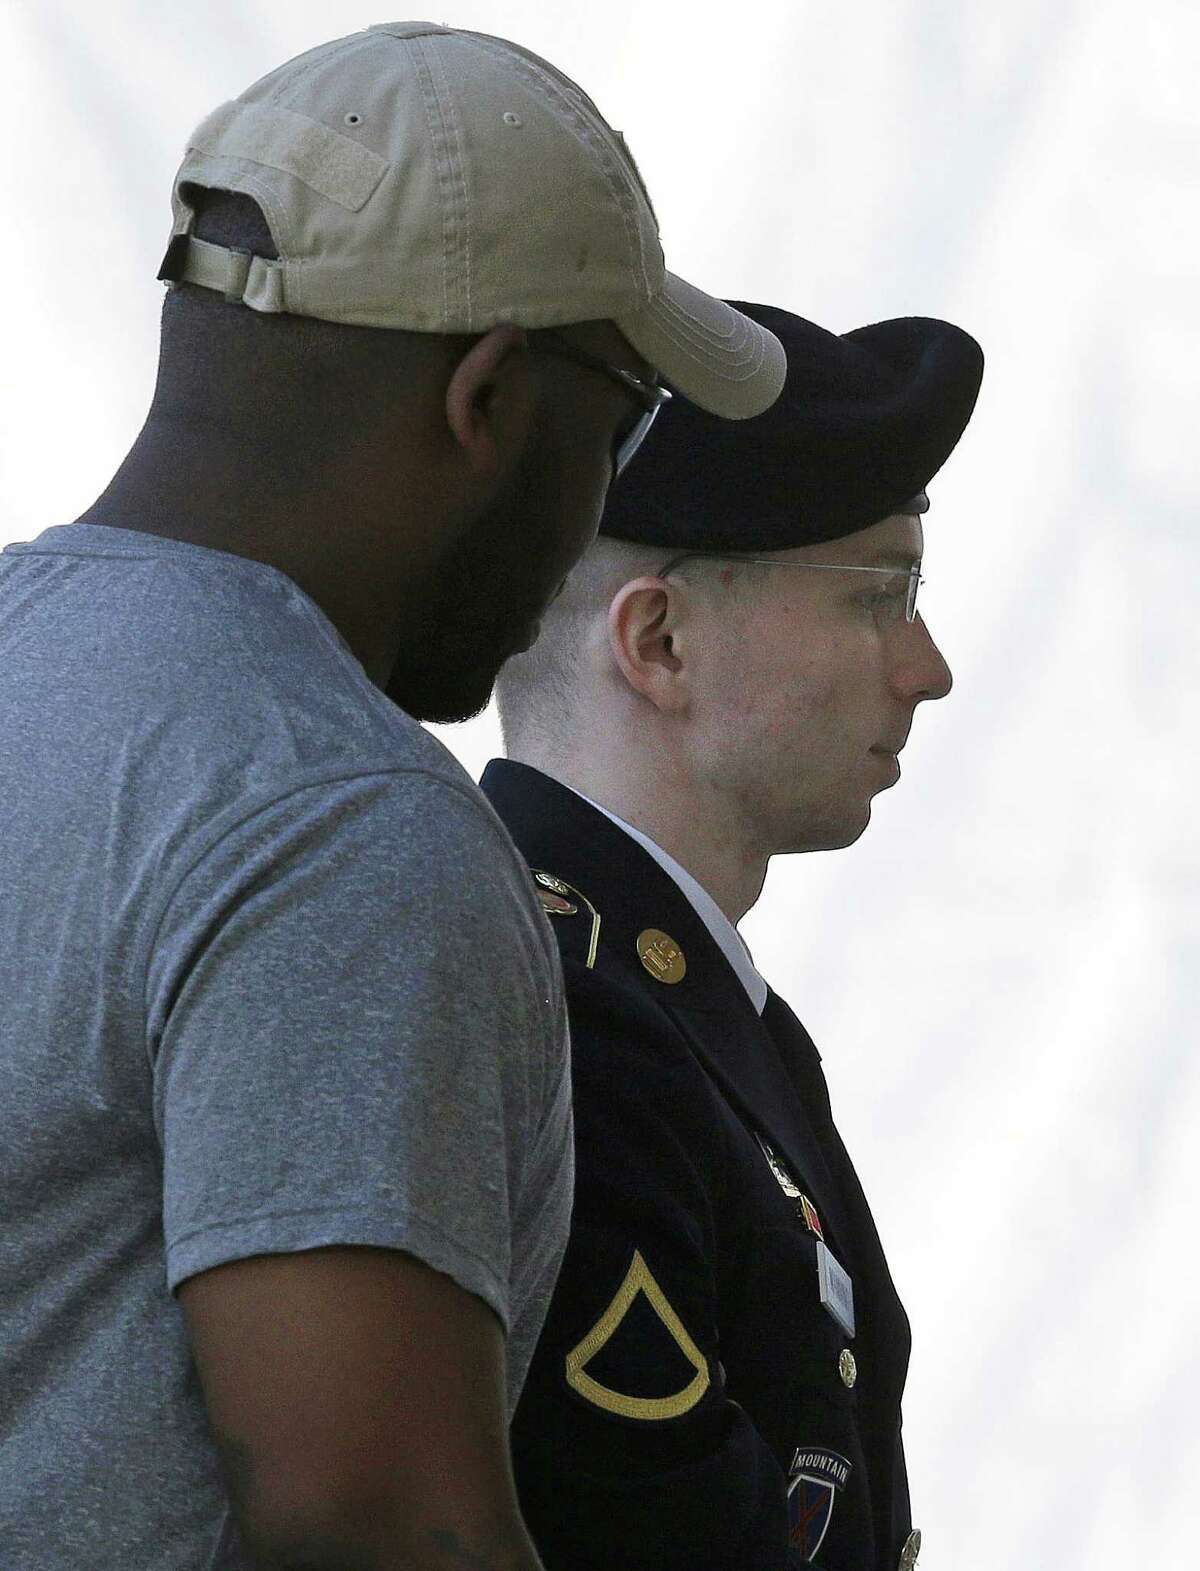 Army Pfc. Bradley Manning (right), if found guilty, could face life in prison plus an additional 154 years. The government is not pursuing the death penalty.